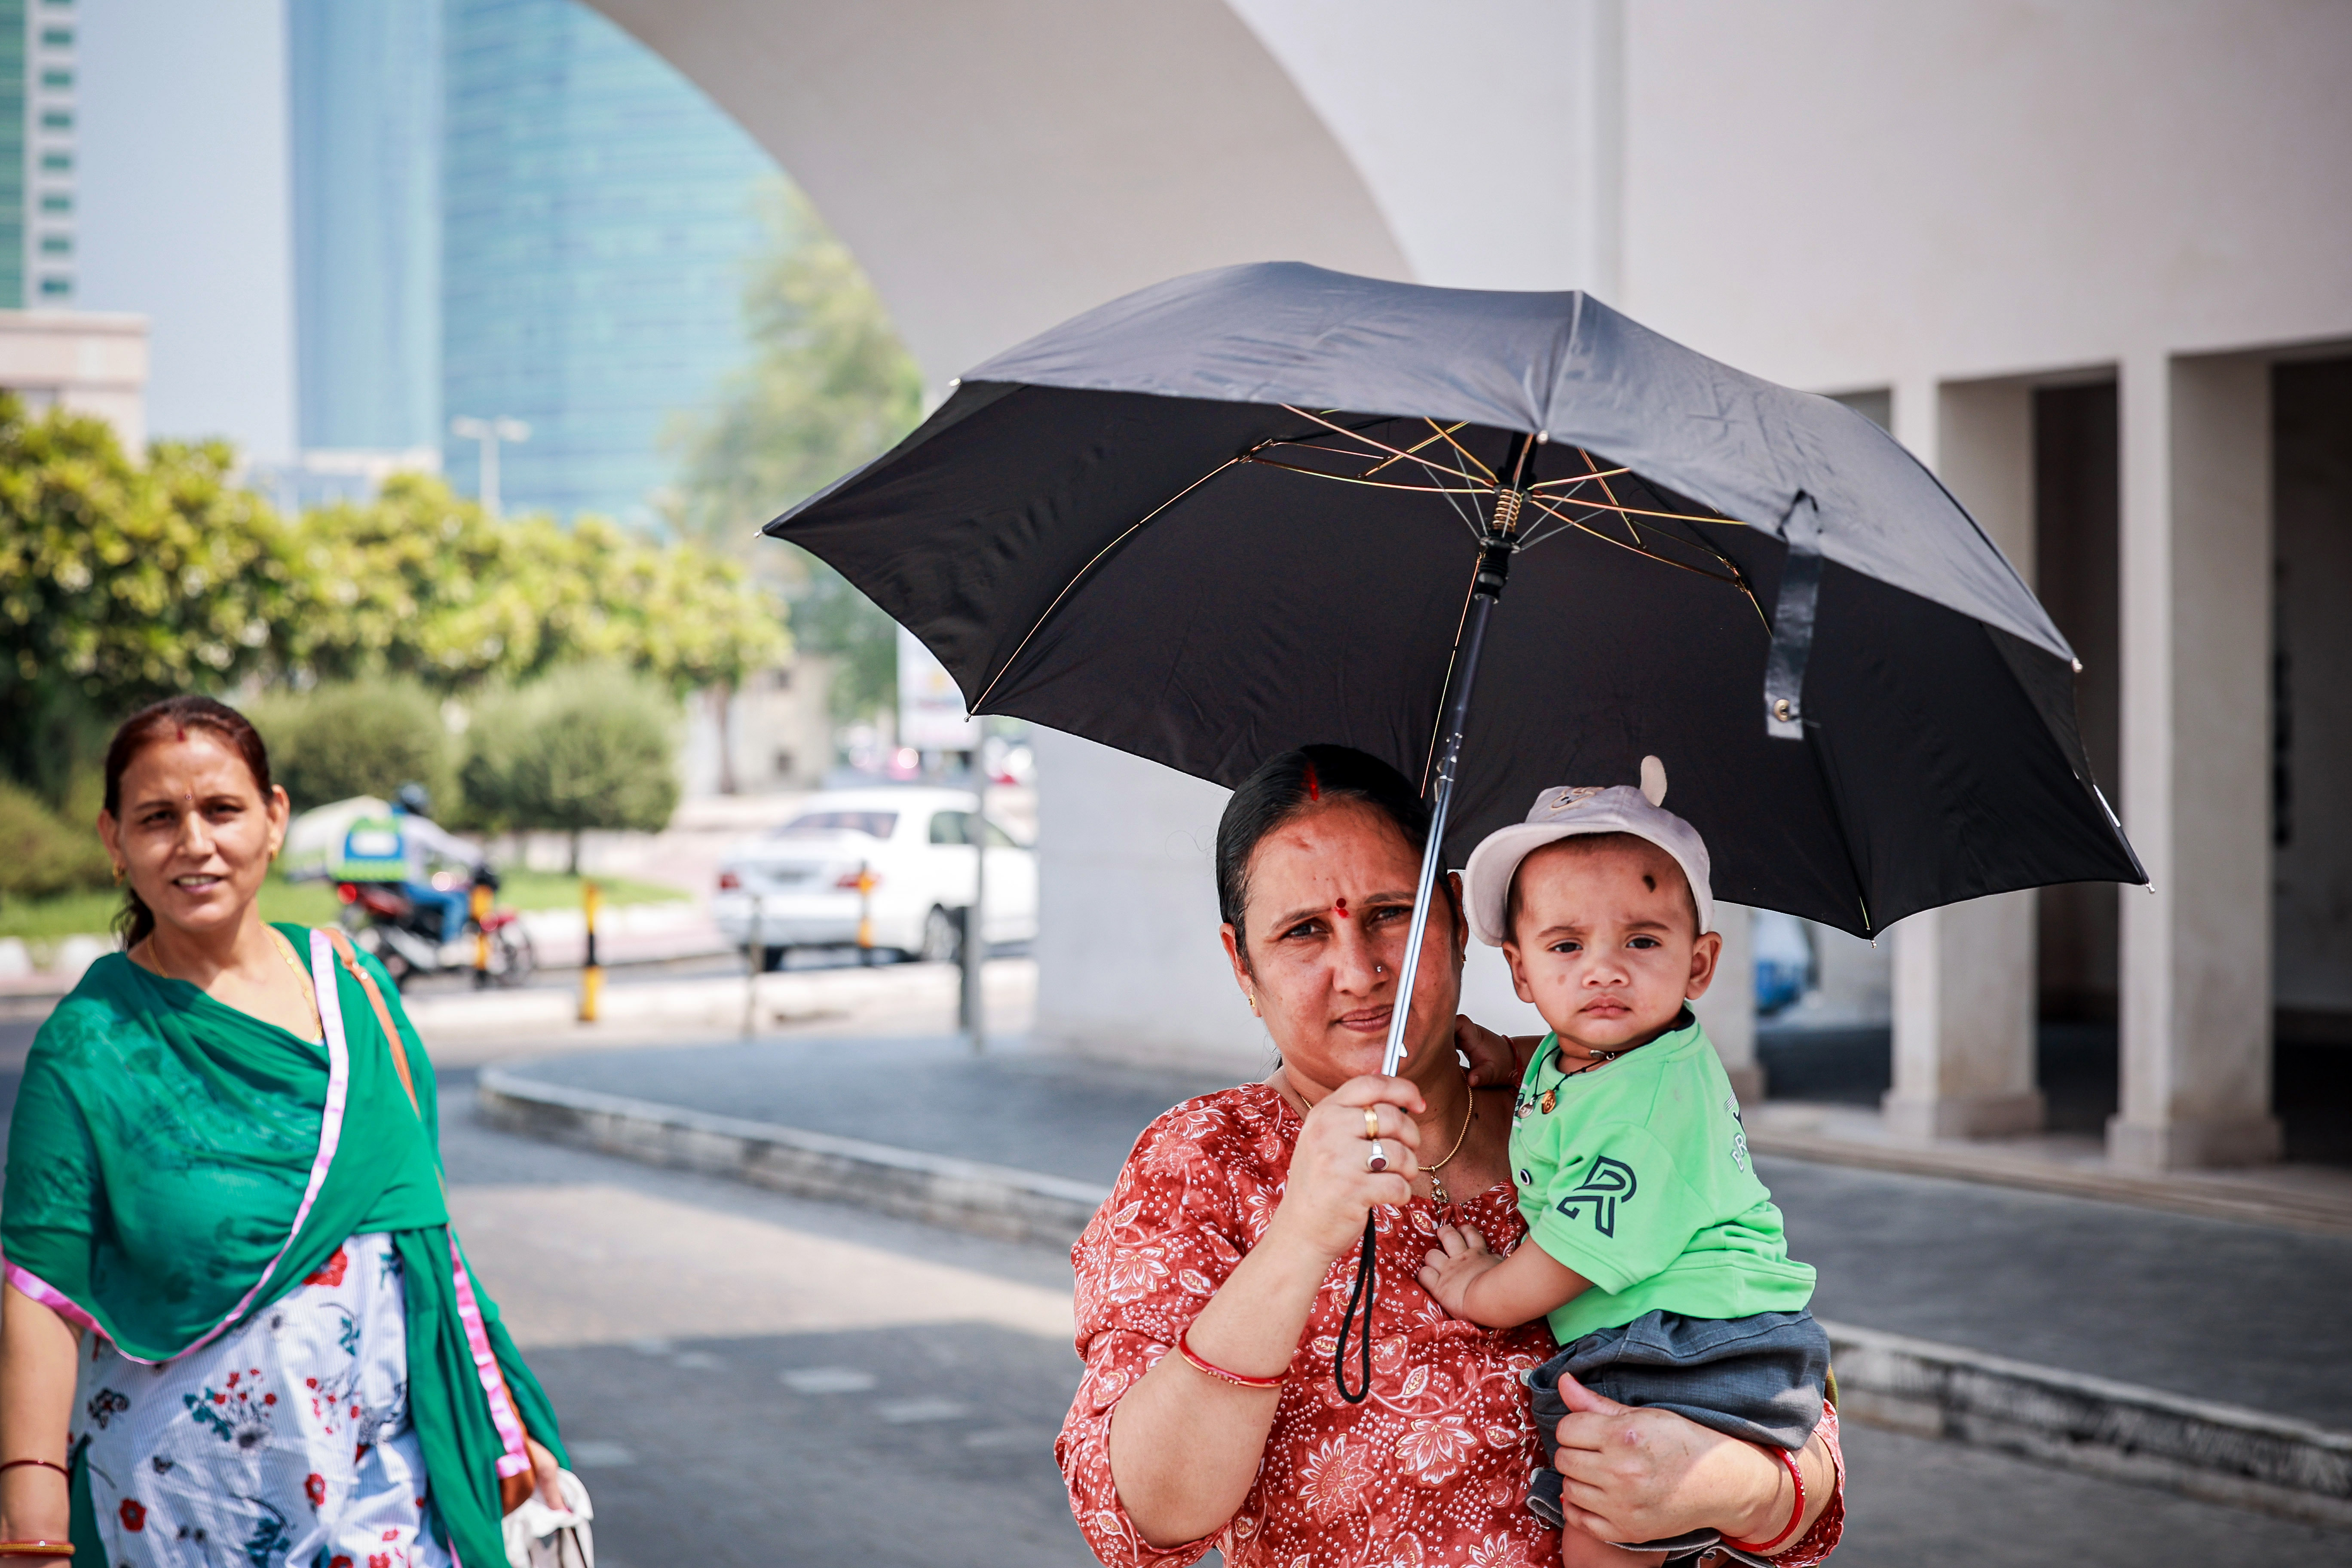 A woman protects her child with an umbrella in Manama as scorching heat and humidity affect the Gulf countries on Aug. 21, 2023. Photo by Ayman Yaqoob/Anadolu Agency via Getty Images.